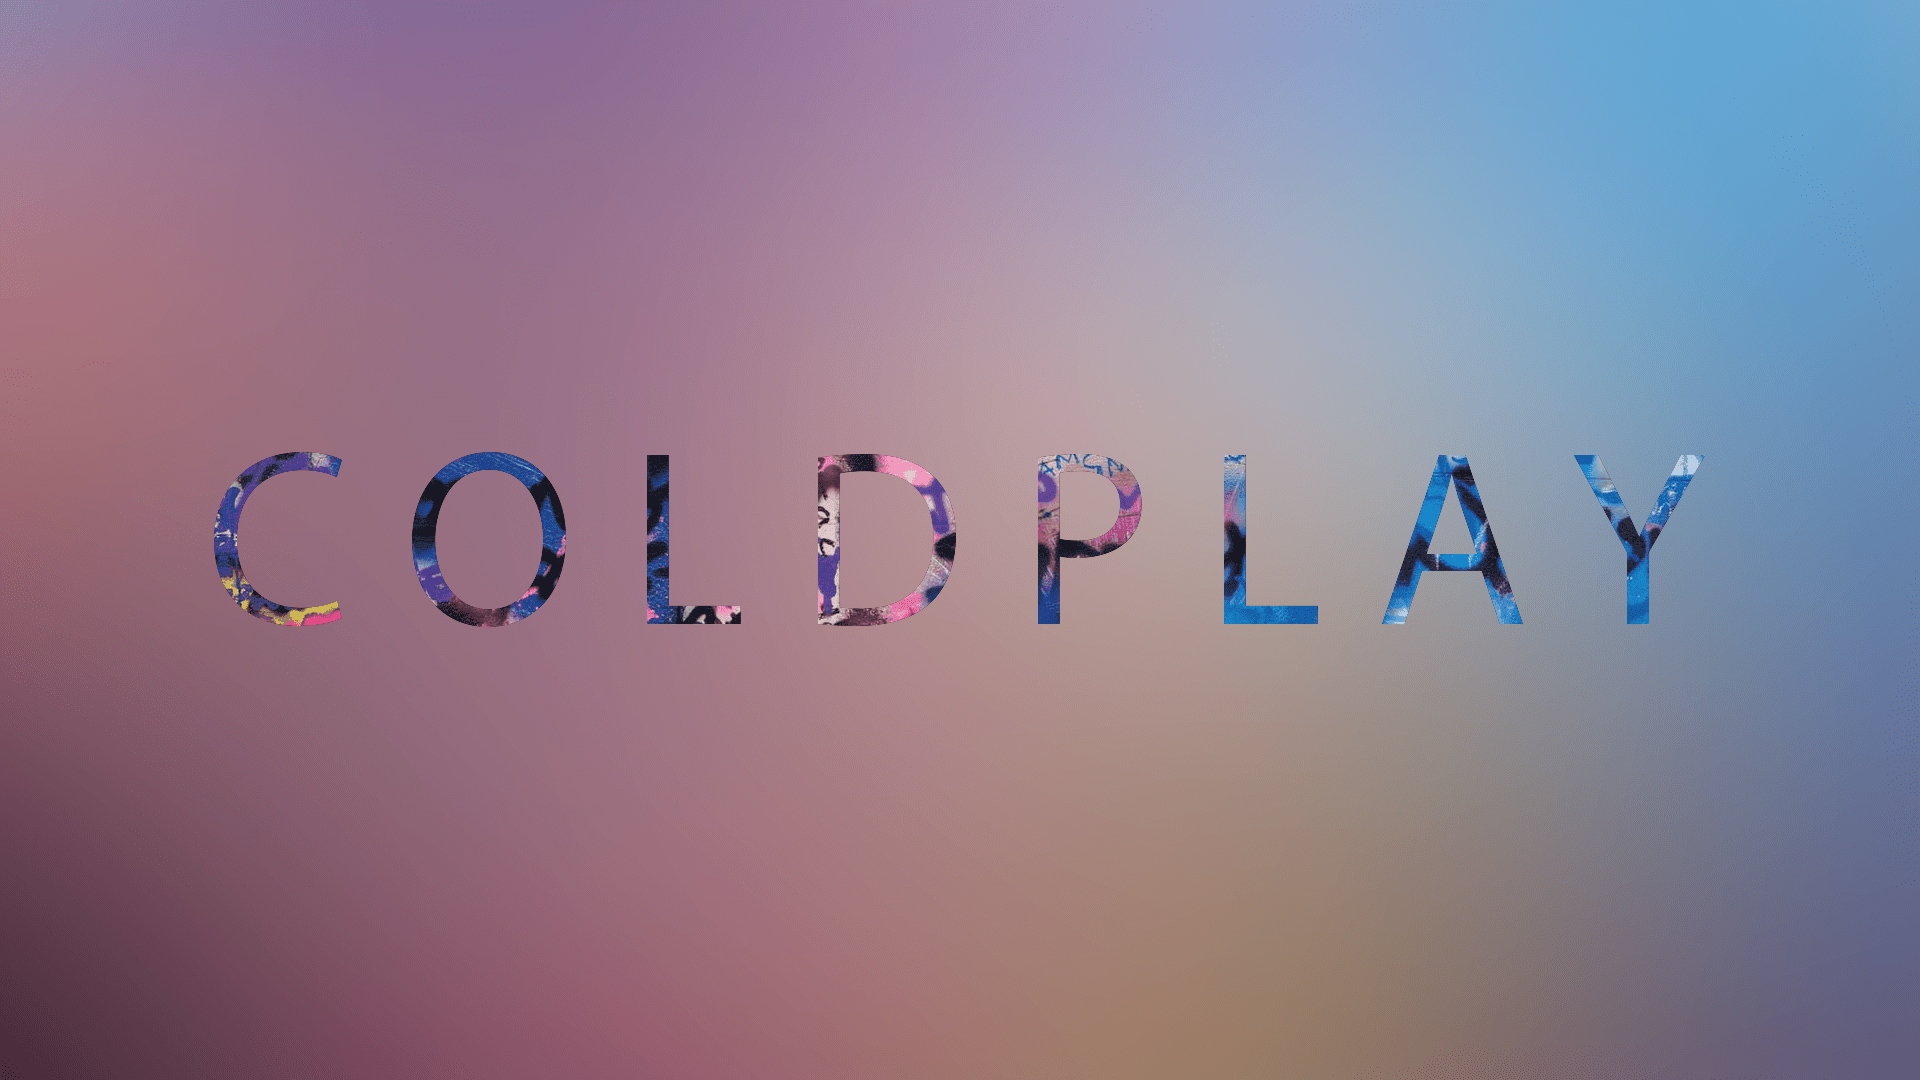 Coldplay HD Wallpapers - Top Free Coldplay HD Backgrounds - WallpaperAccess